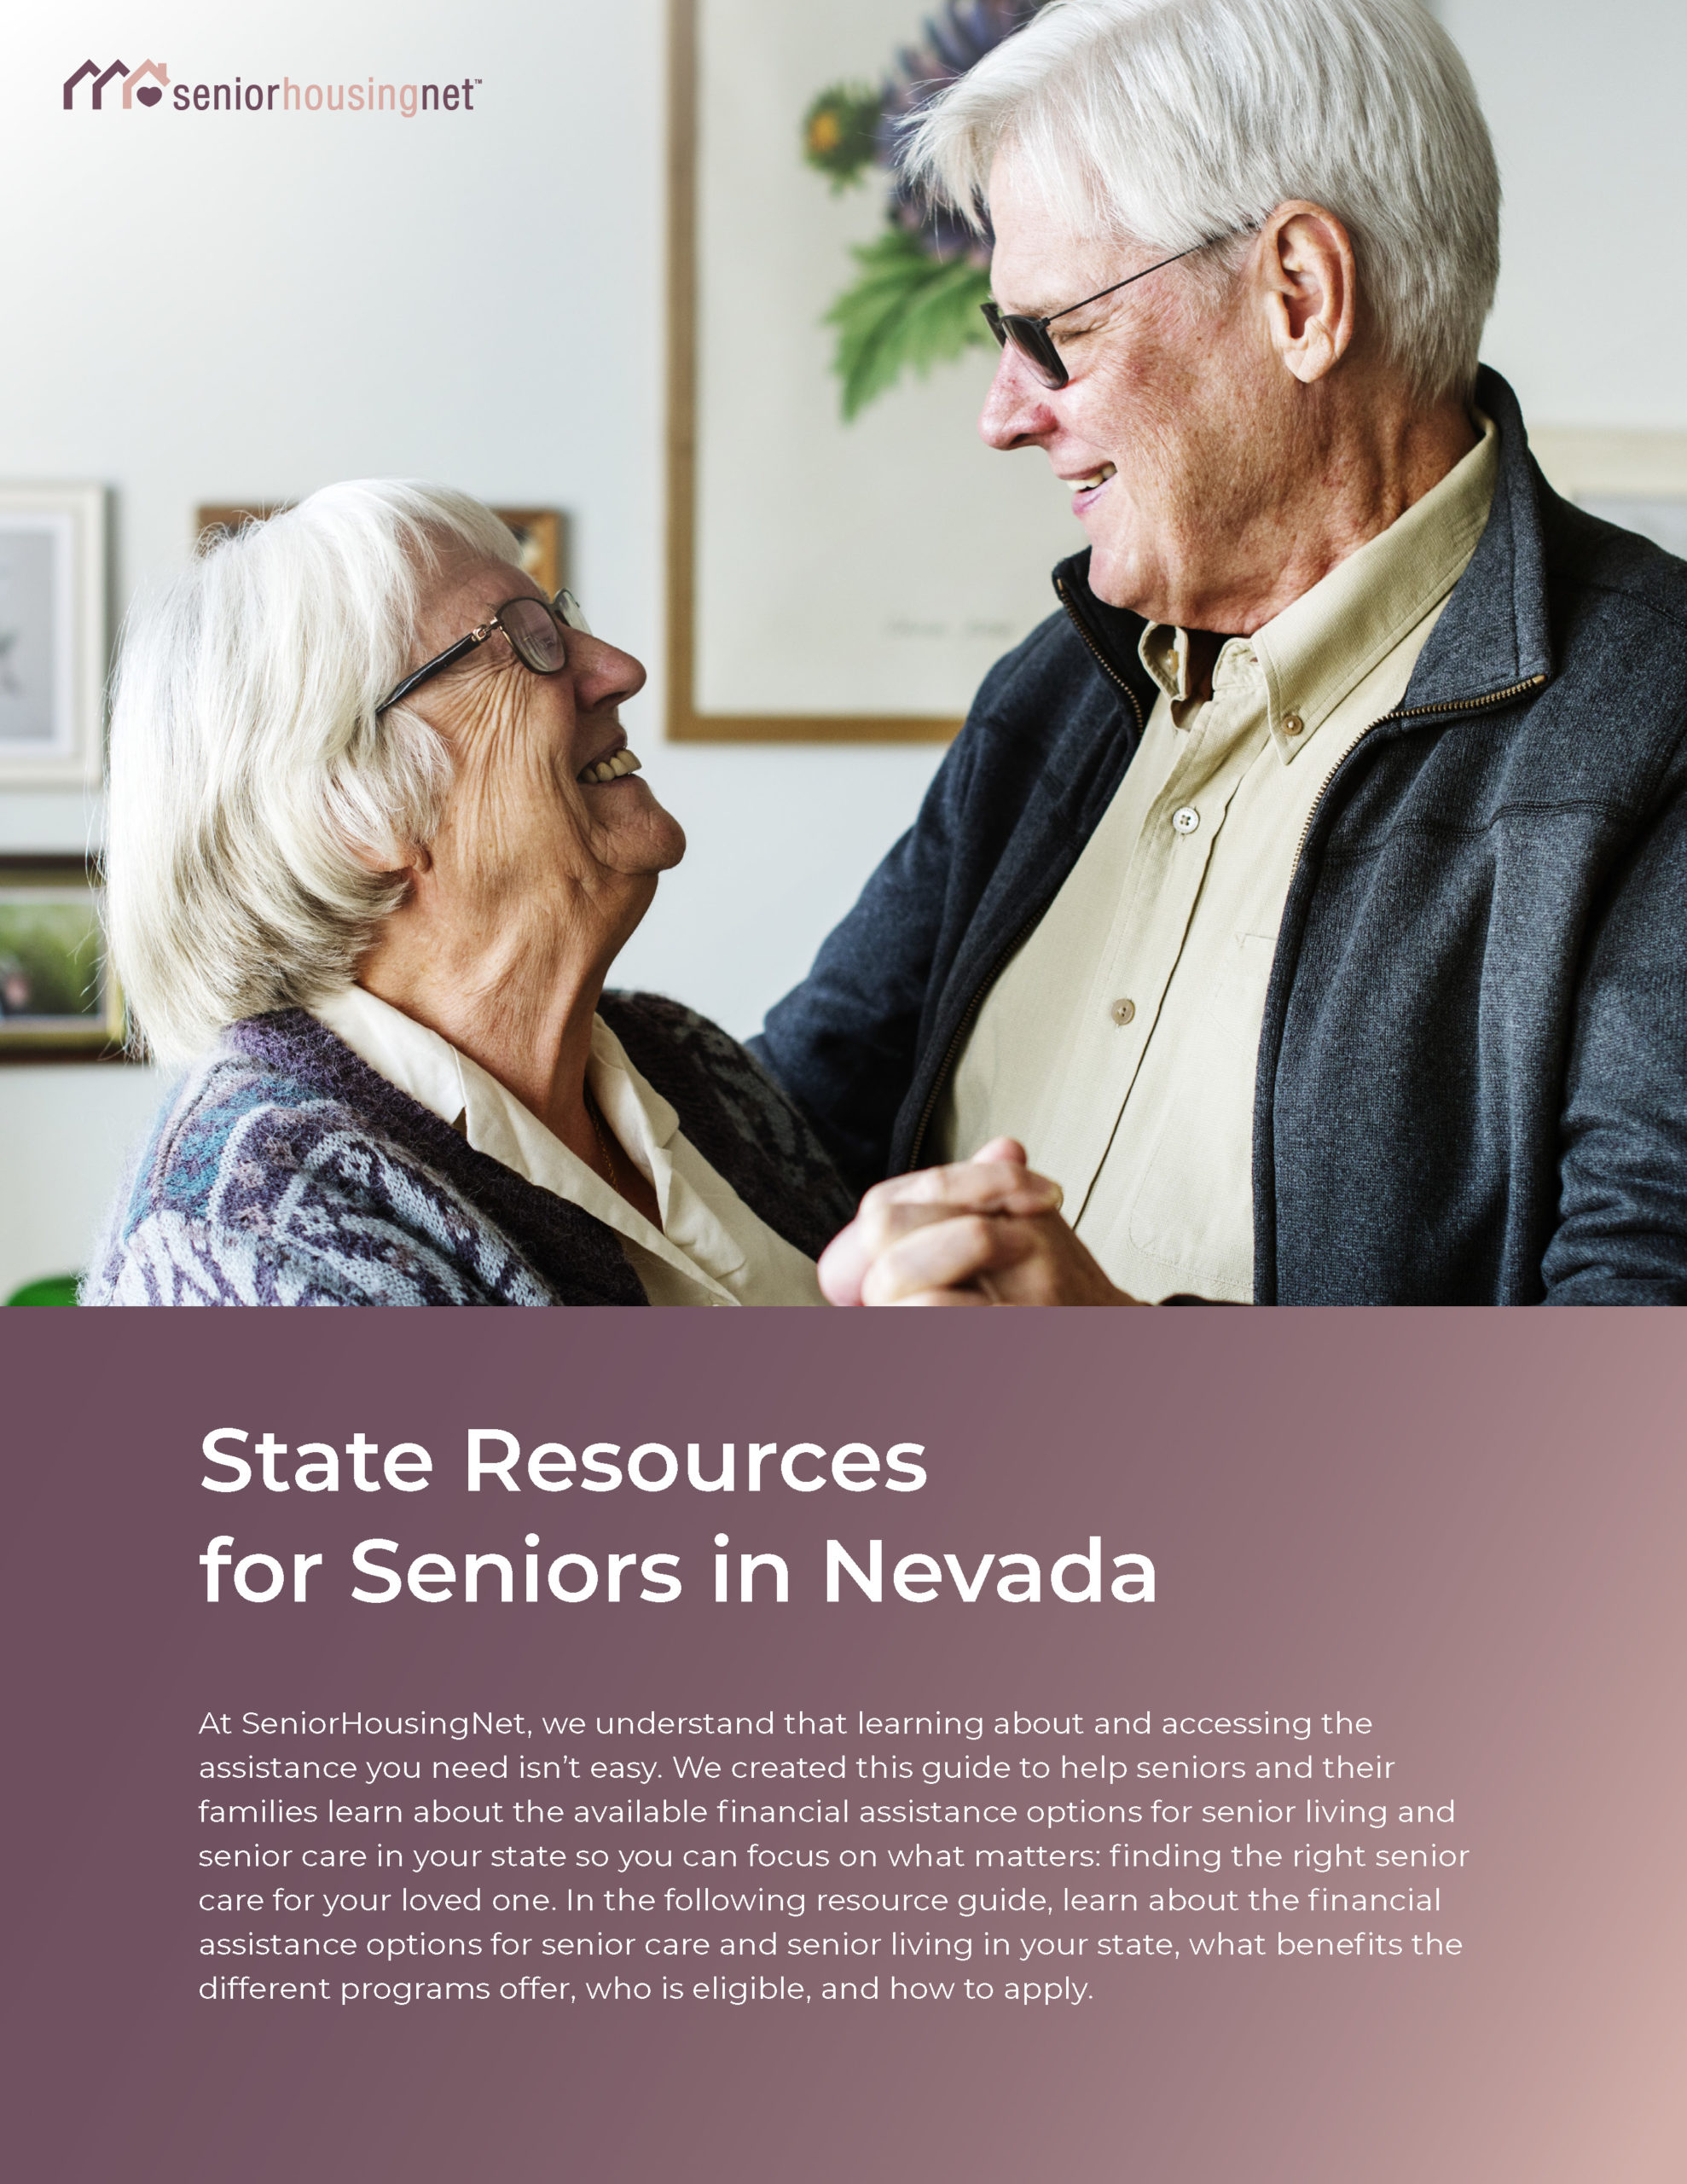 State Resources for Seniors in Nevada